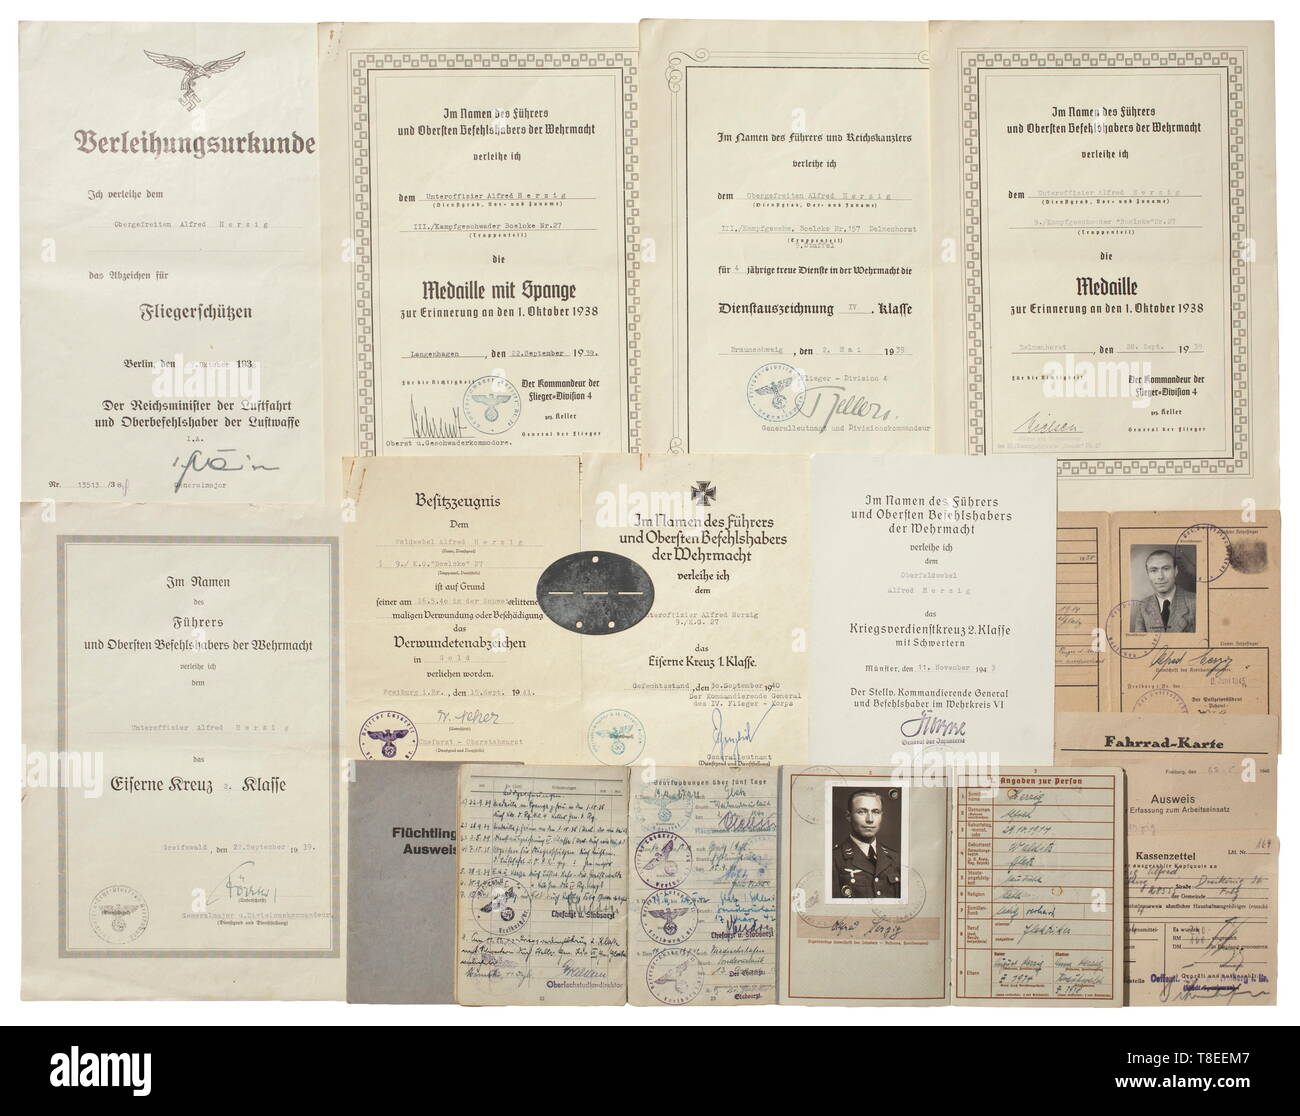 A group of award documents and documentation - Oberfeldwebel Alfred Herzig in Bomber Wing Boelcke no. 27 The pay book from 1 March 1939 to the final entry on 5 December 1944. Also the Wehrpass (military service book) with award entries and identity disc. Further, eight award documents (War Merit Cross with Swords, Iron Cross 1st and 2nd Class, Air Gunner's Badge etc.). Together with Herzig's postwar documents and identity cards. Signs of age. historic, historical, Air Force, branch of service, branches of service, armed service, armed services, military, militaria, air forc, Editorial-Use-Only Stock Photo